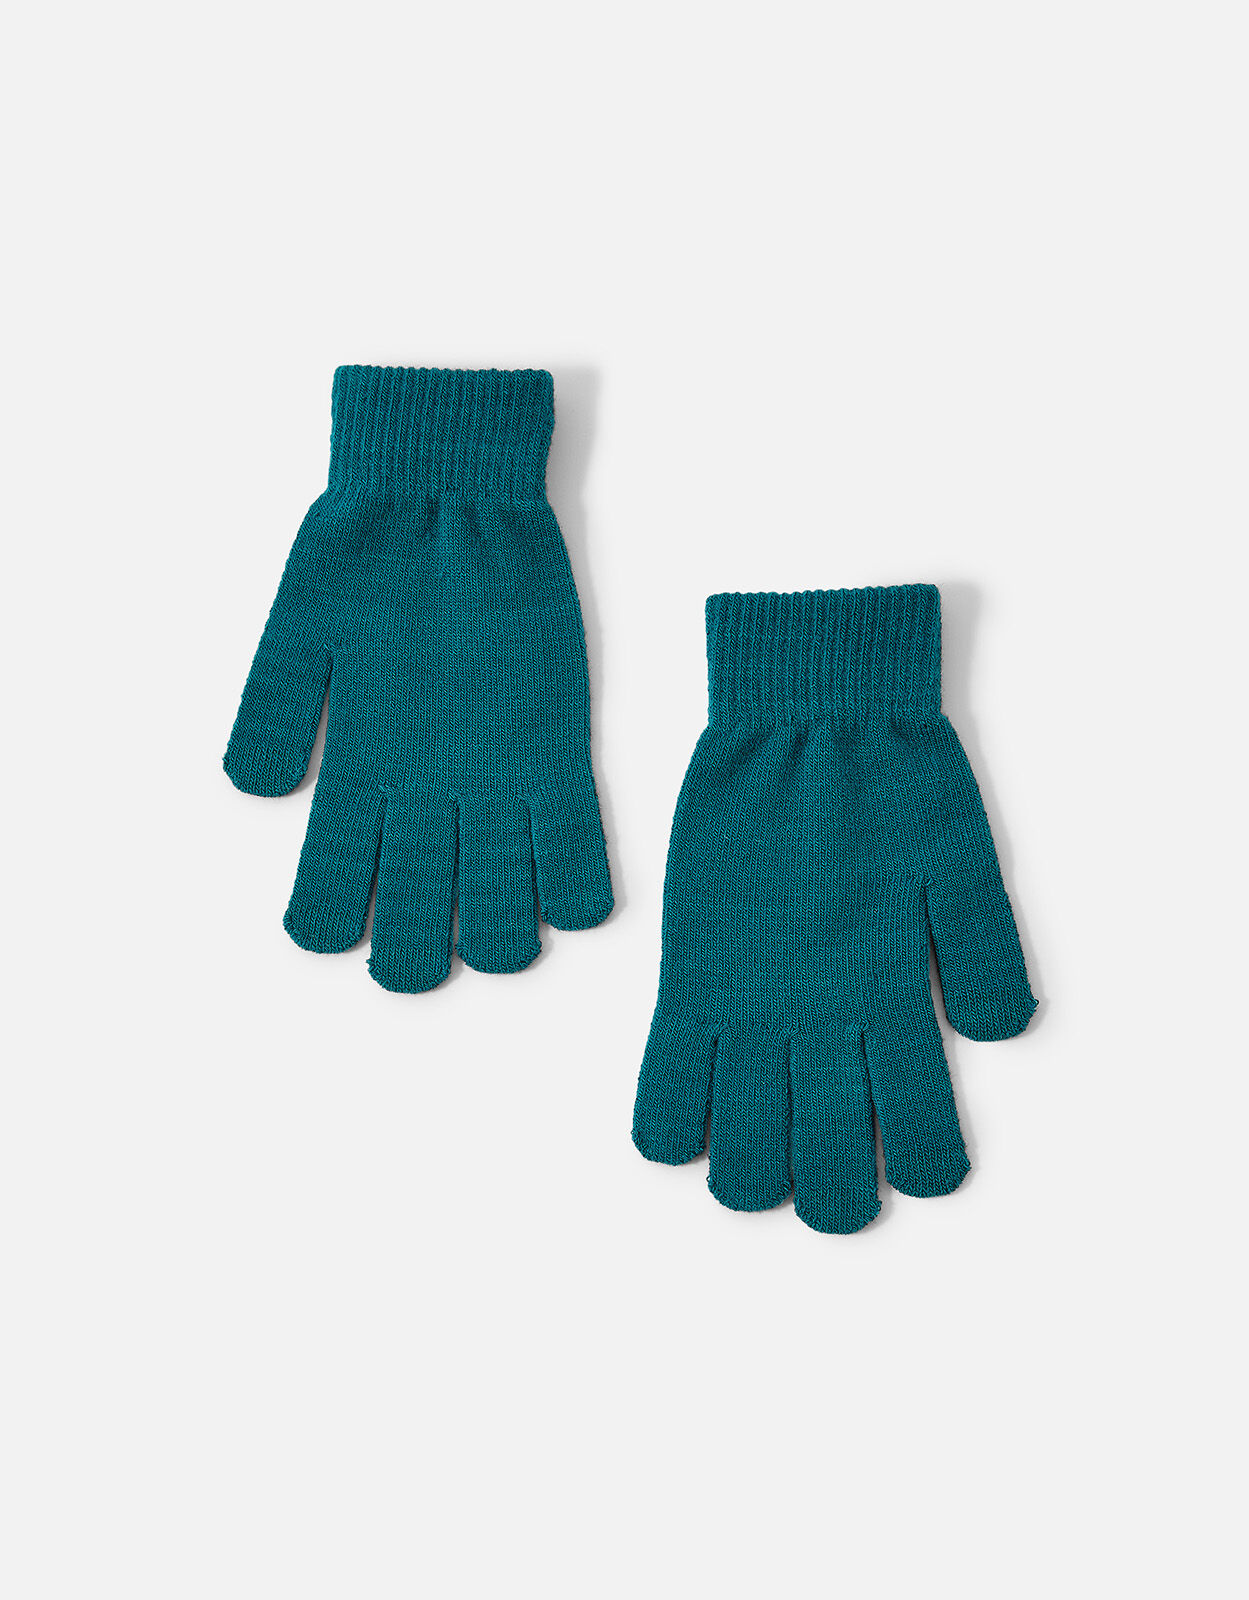 wool free typing gloves Cold office fashion gloves Accessoires Handschoenen & wanten Wanten & handmoffen boho Feeling the Blues smart phone iPhone gloves gift cool weather 